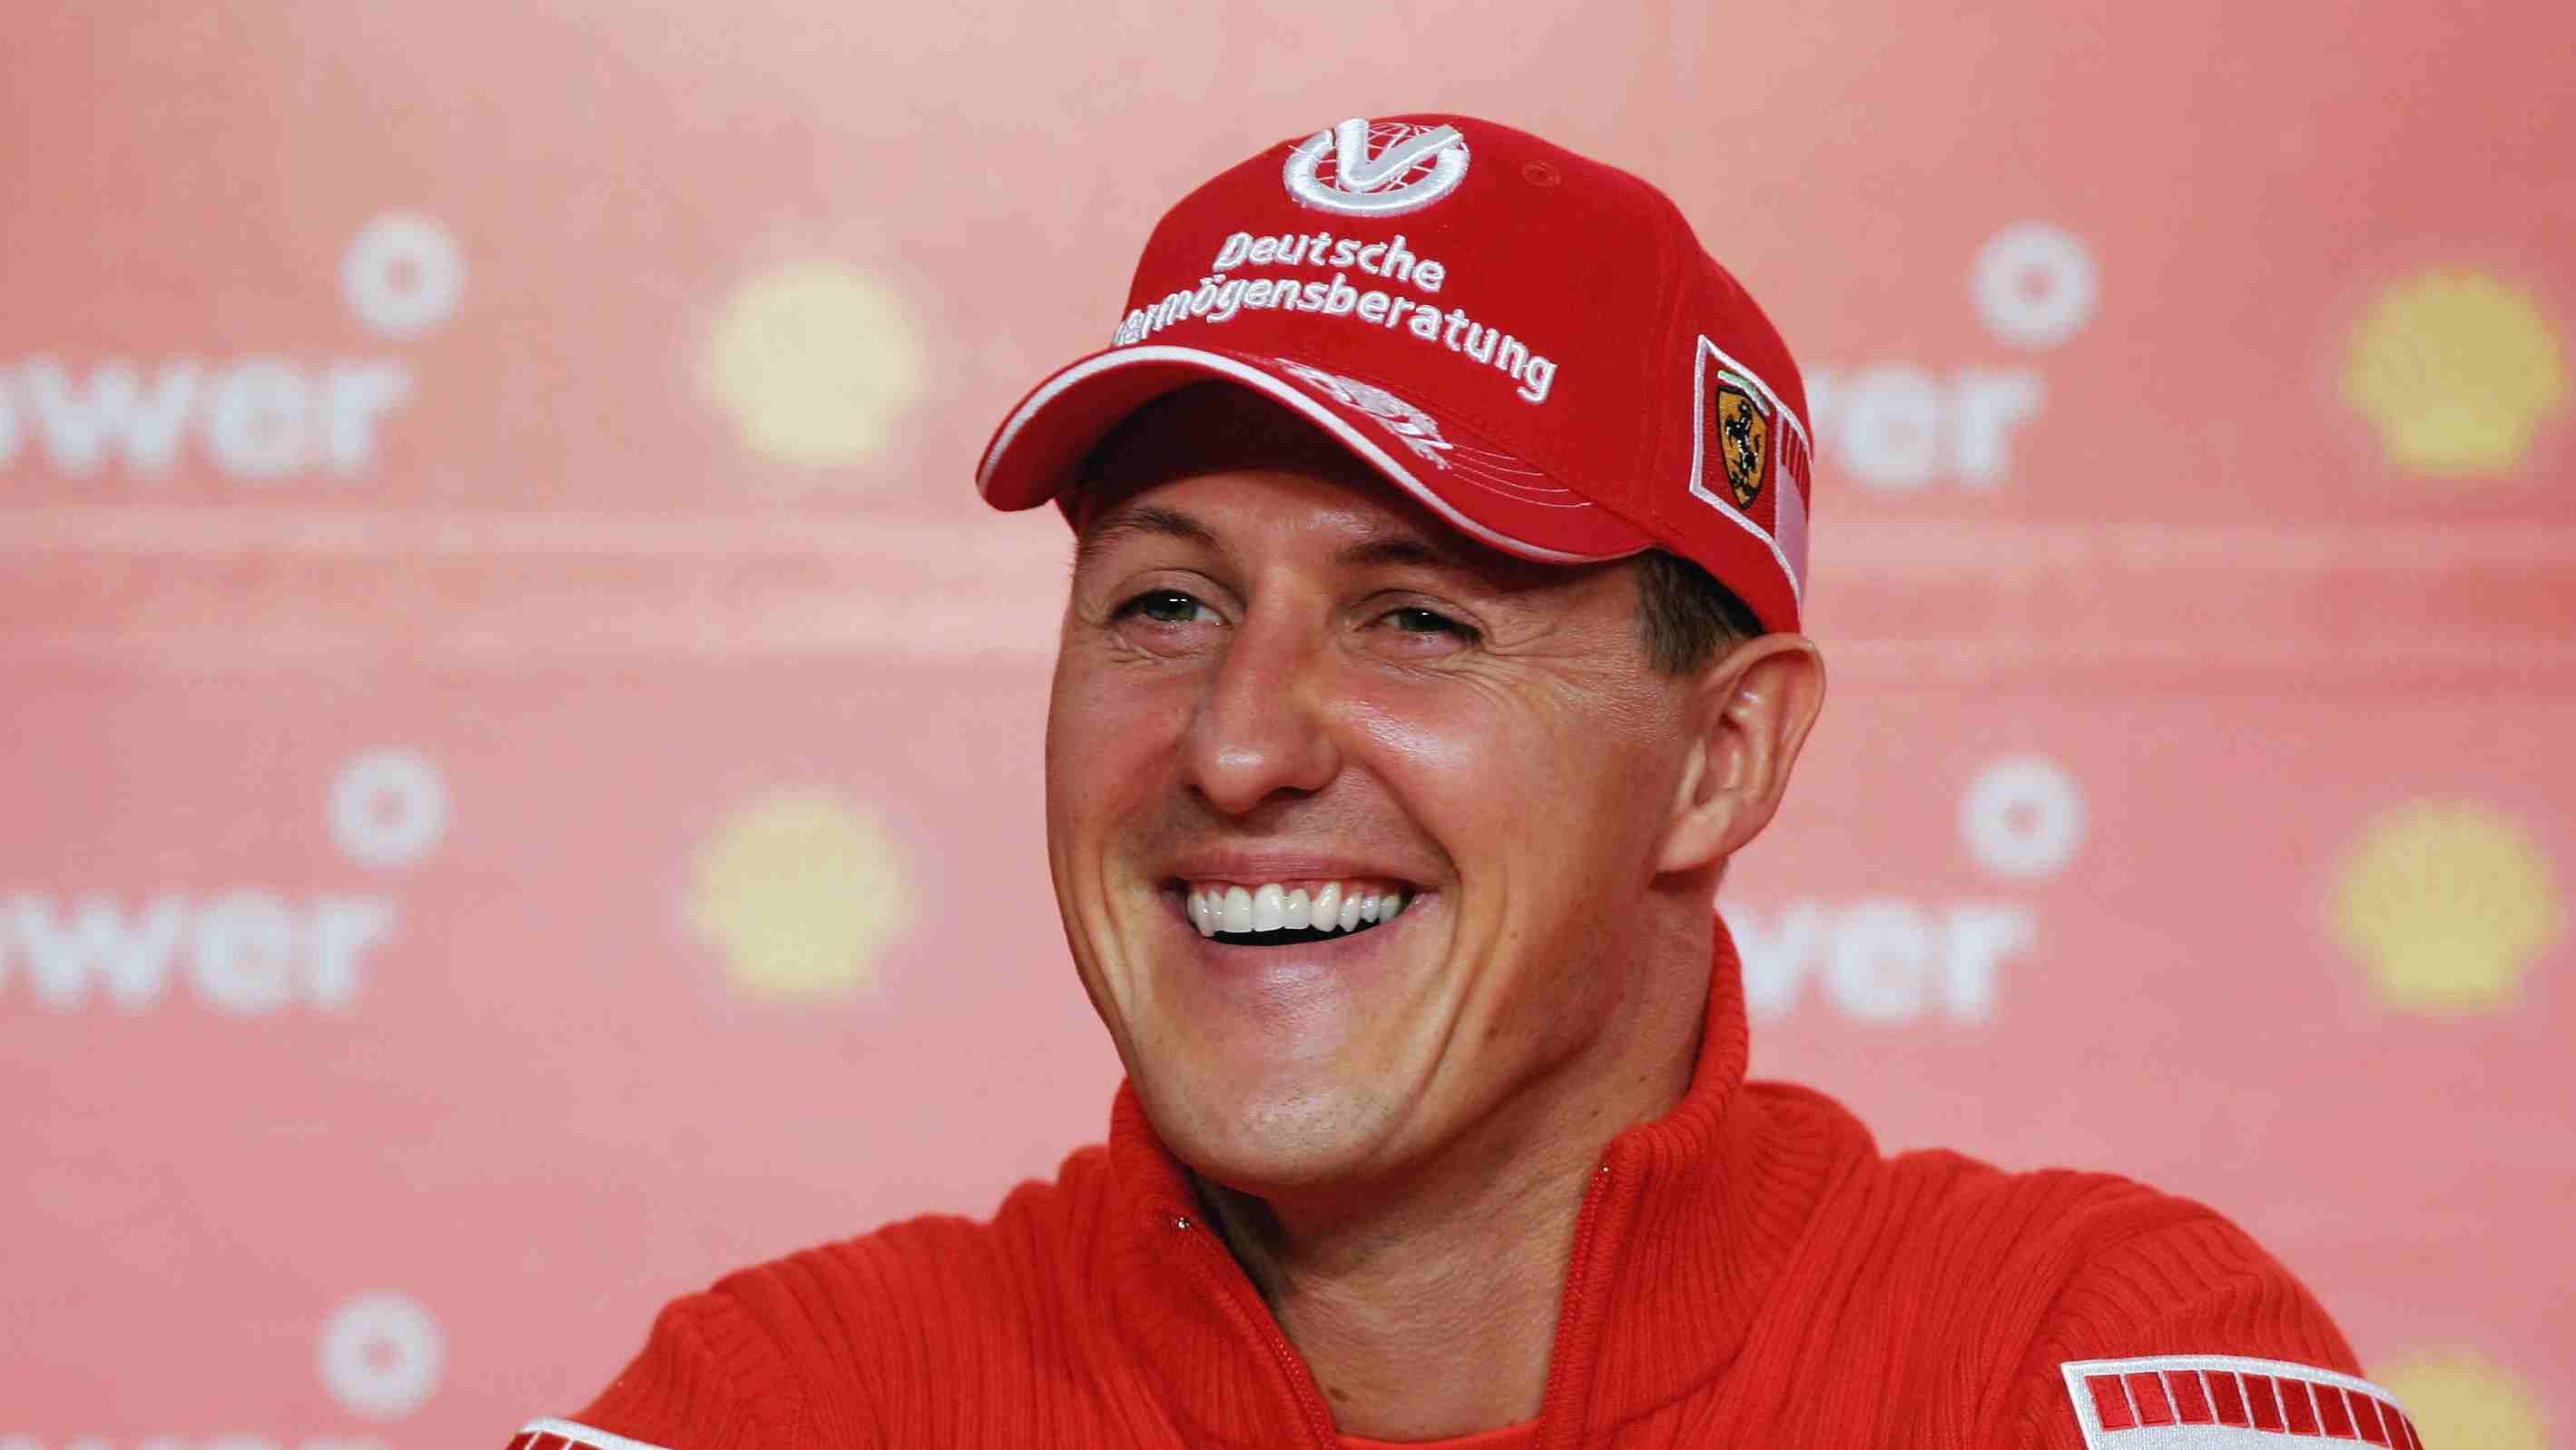 “He is conscious”: Turning point in Michael Schumacher's sad plight